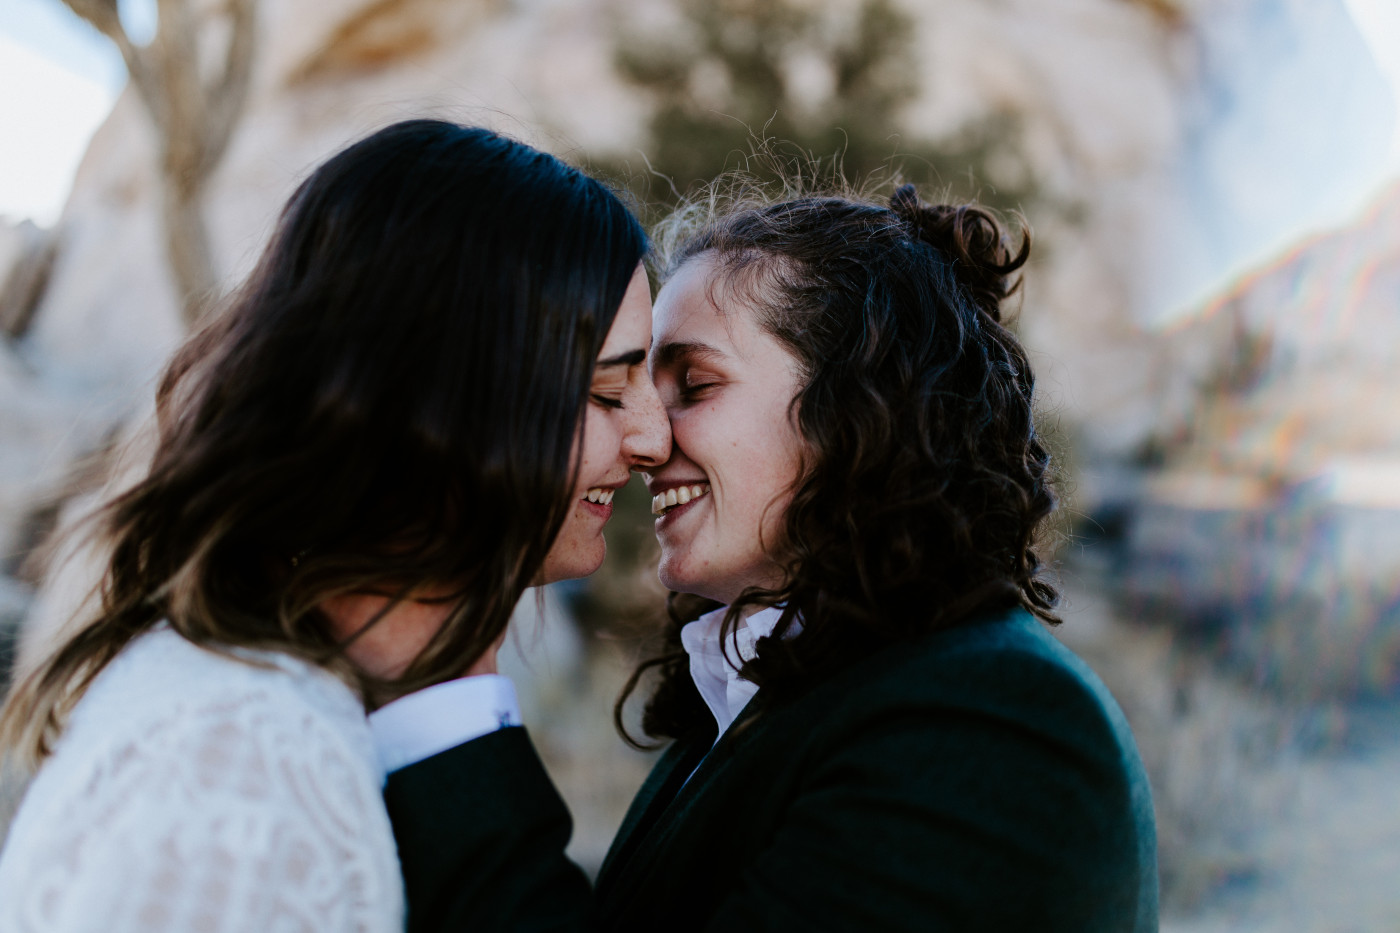 Becca and Madison kiss in the Joshua Tree National Park.